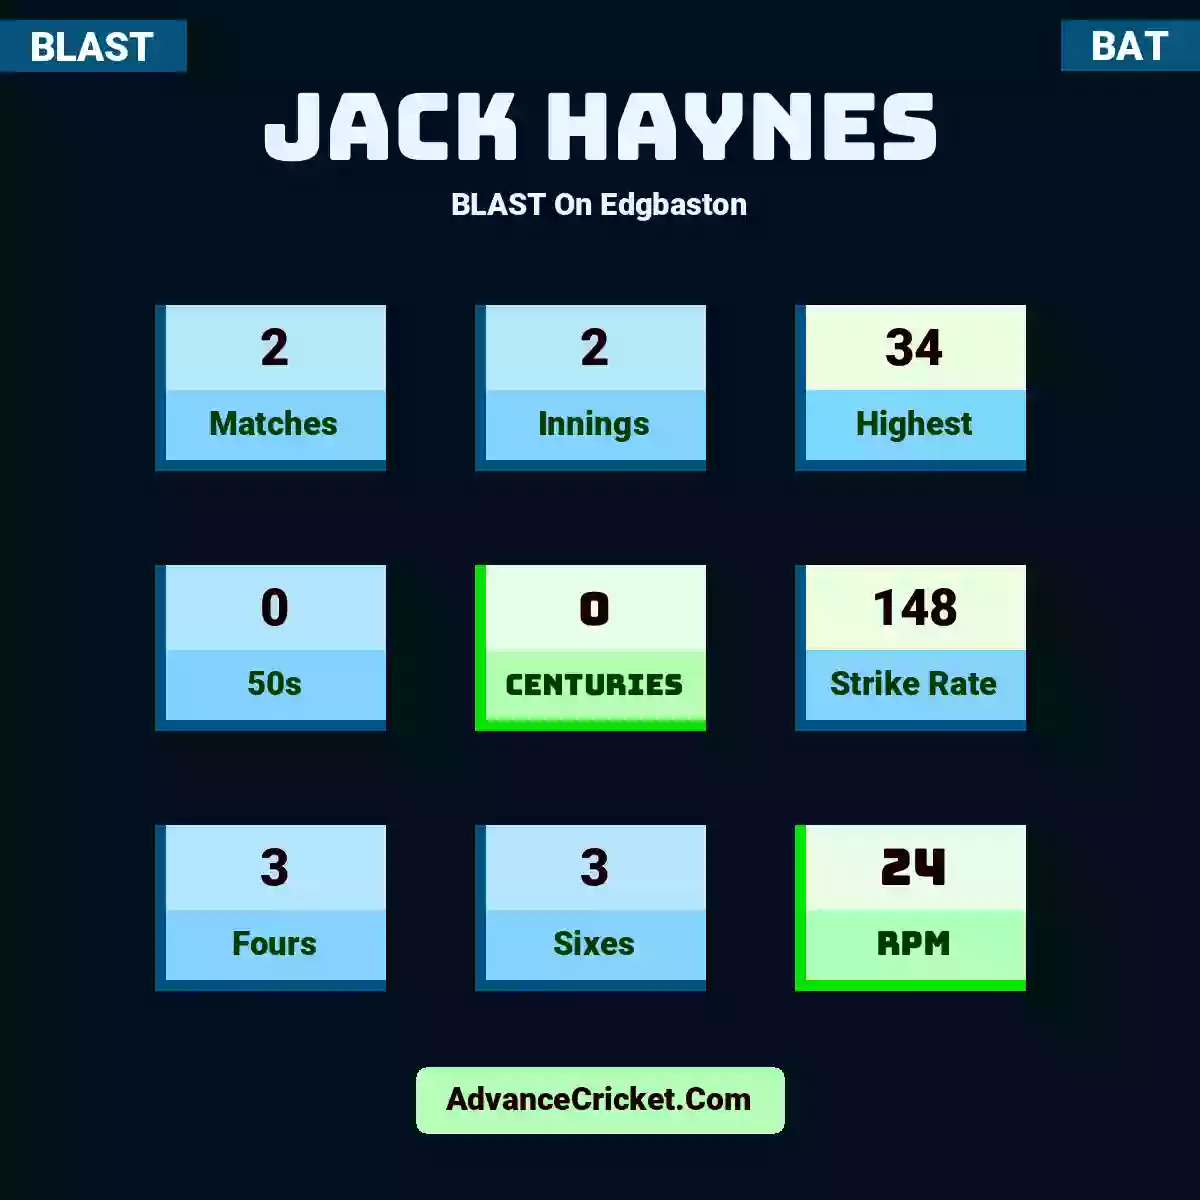 Jack Haynes BLAST  On Edgbaston, Jack Haynes played 2 matches, scored 34 runs as highest, 0 half-centuries, and 0 centuries, with a strike rate of 148. J.Haynes hit 3 fours and 3 sixes, with an RPM of 24.